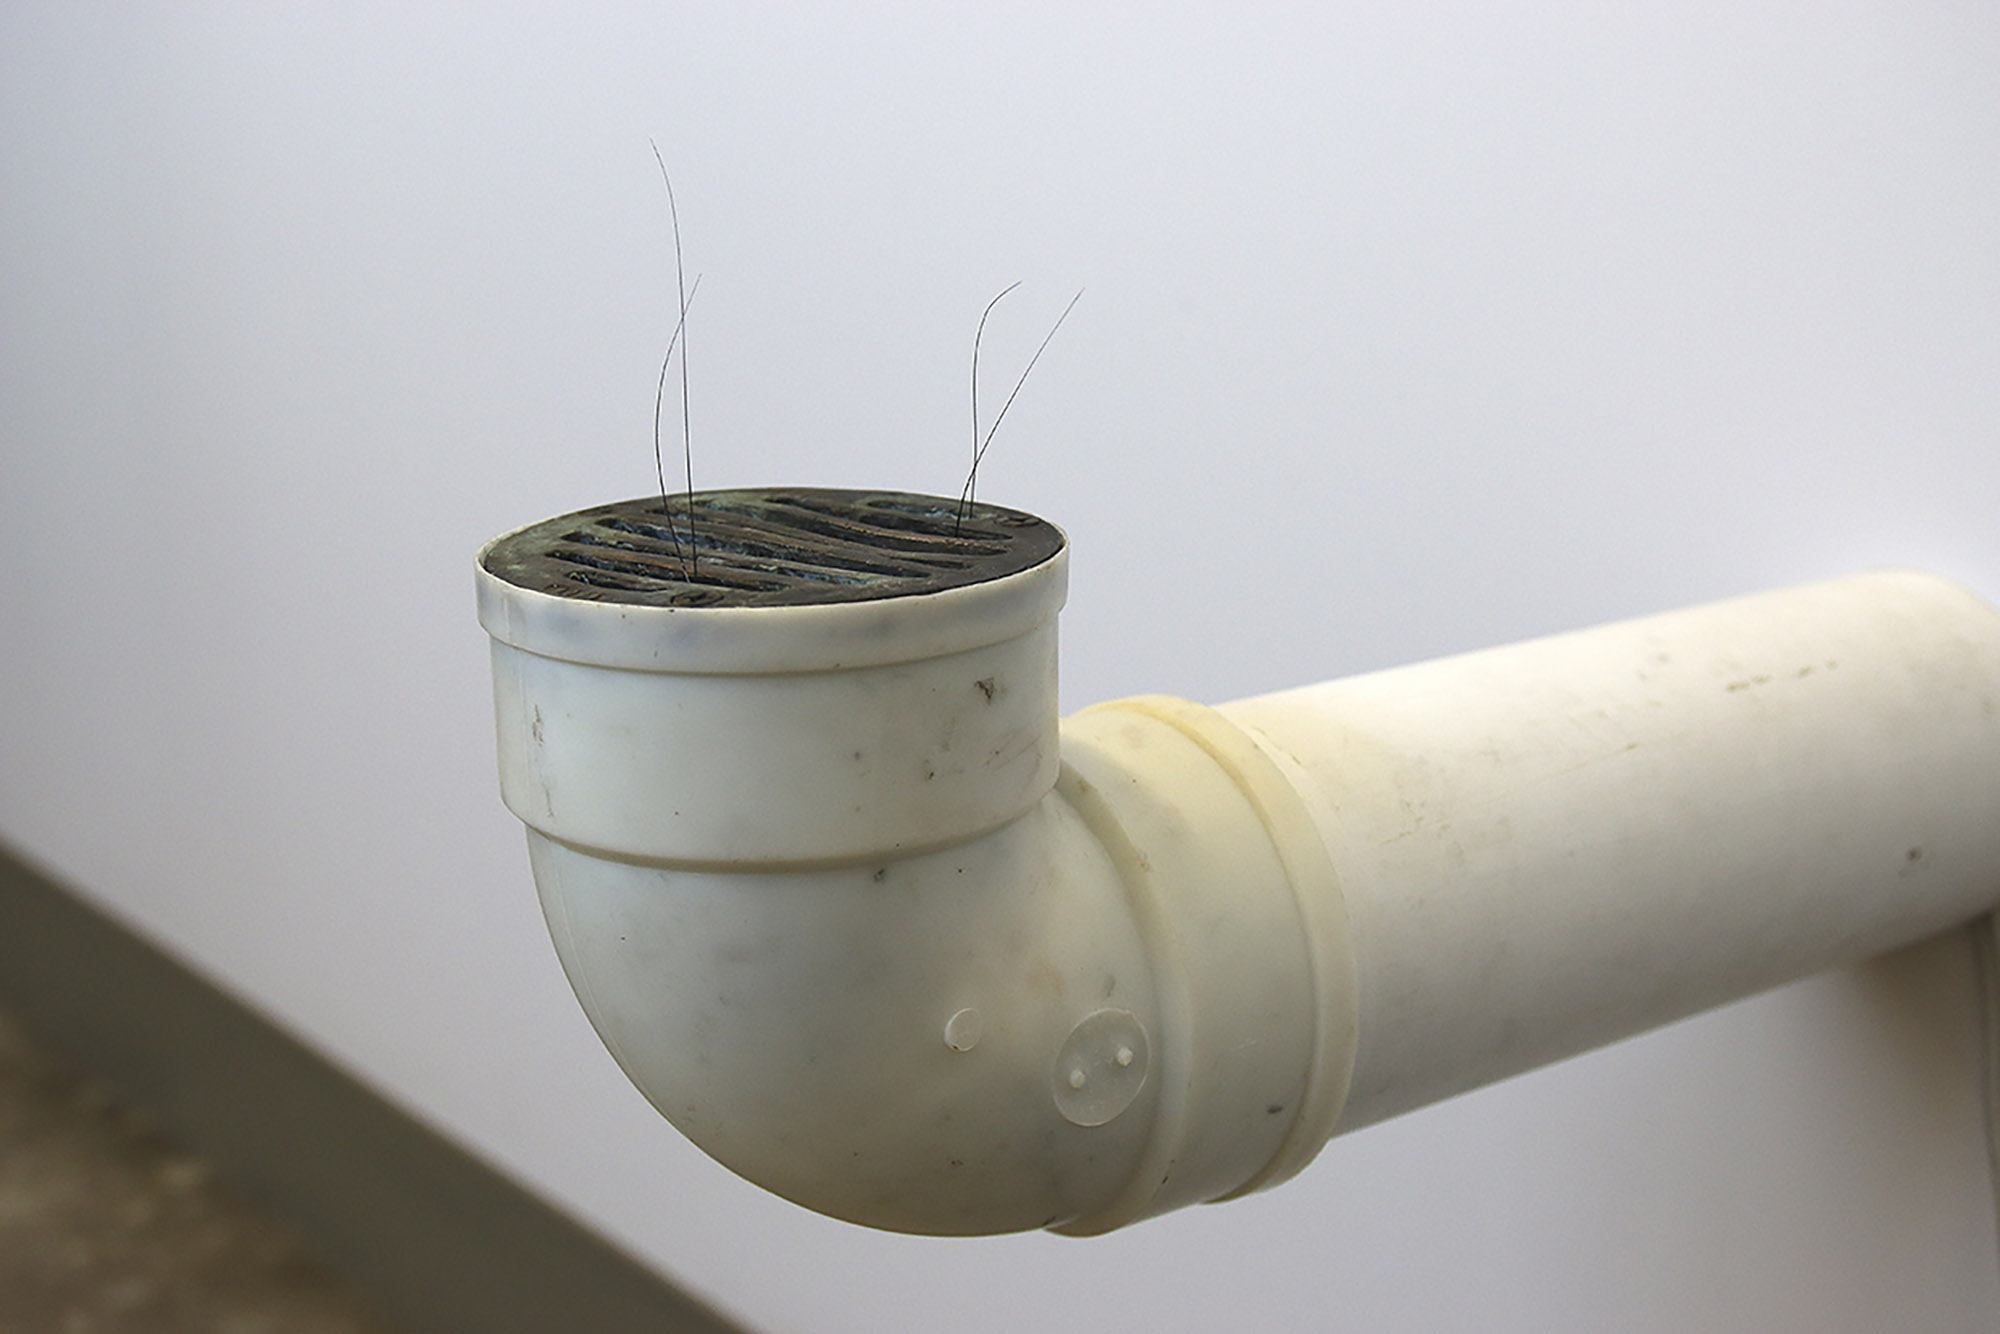 A pipe coming out of a wall with a drain and four hairs sticking from it